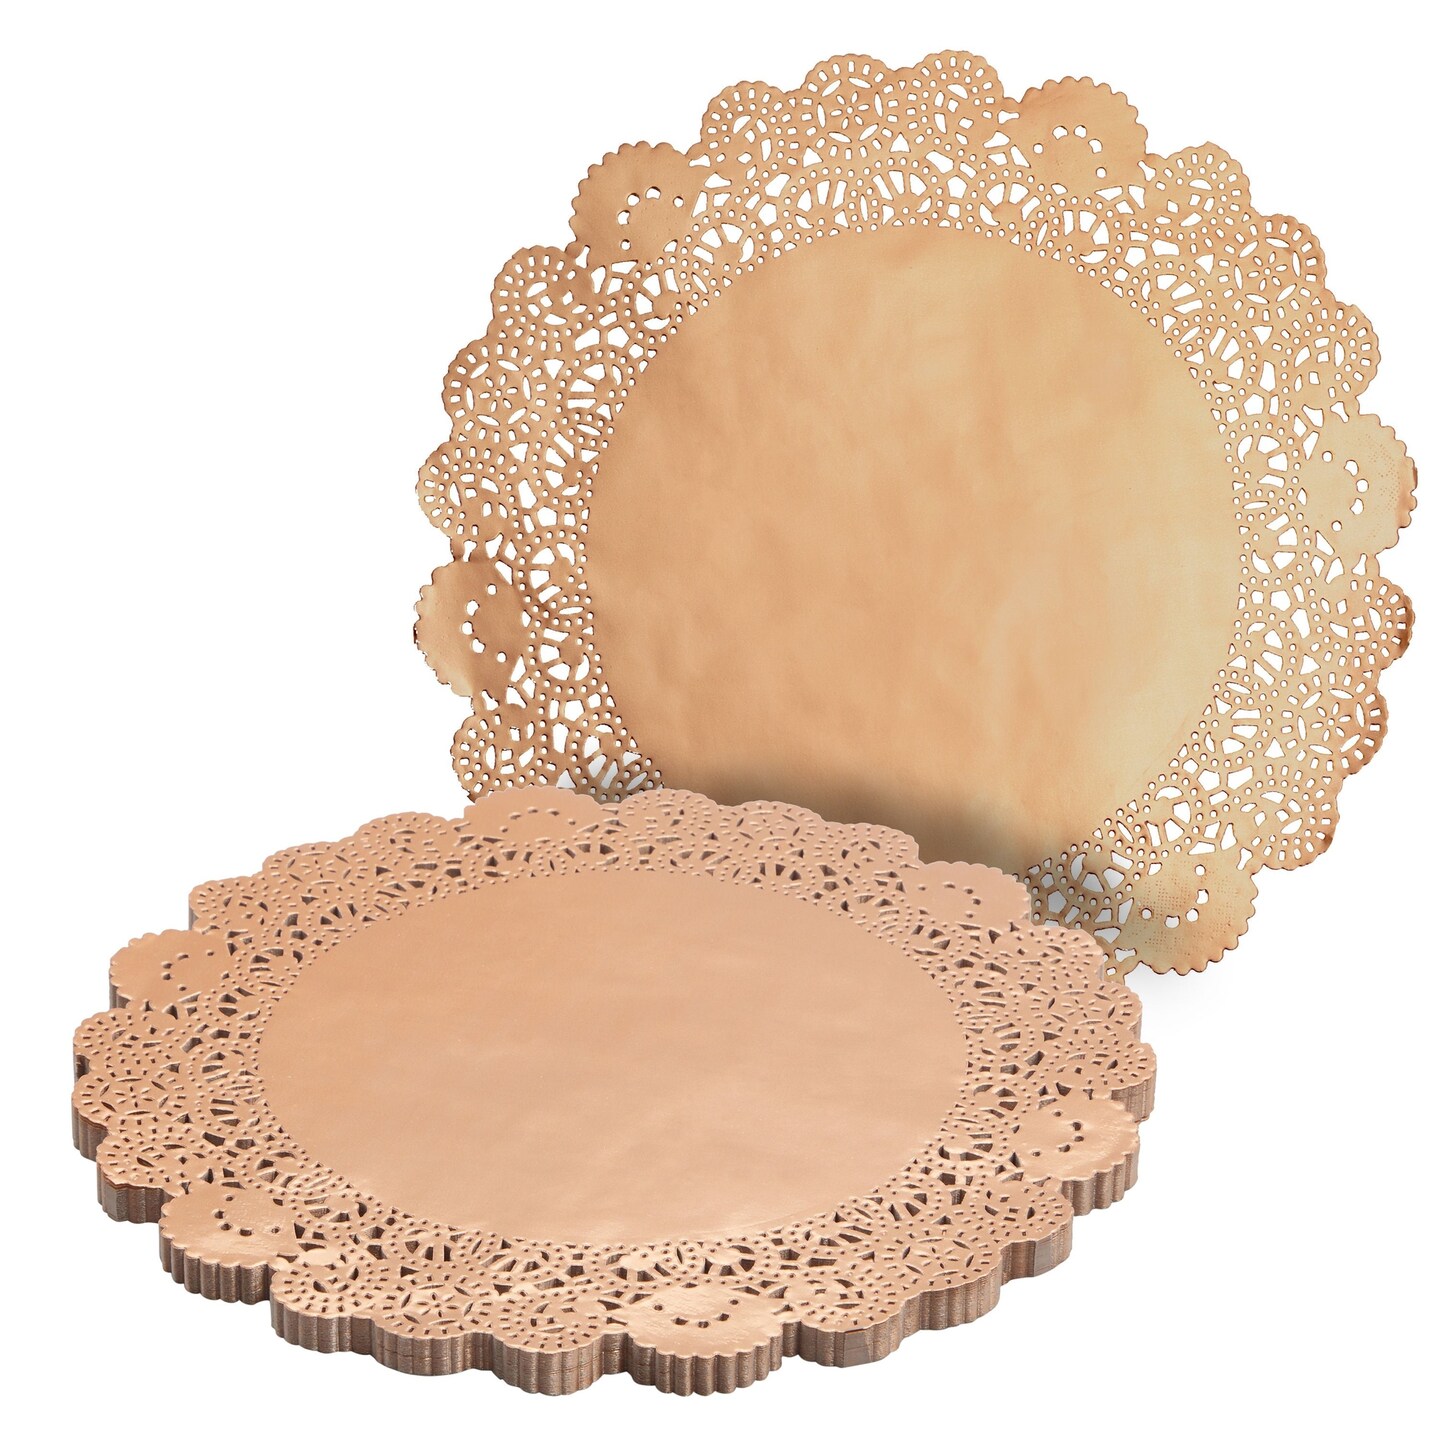 100 Pack Metallic Copper Orange Placemats, Round Paper Lace Doilies for Place Settings, Desserts, Formal Events (10 In)